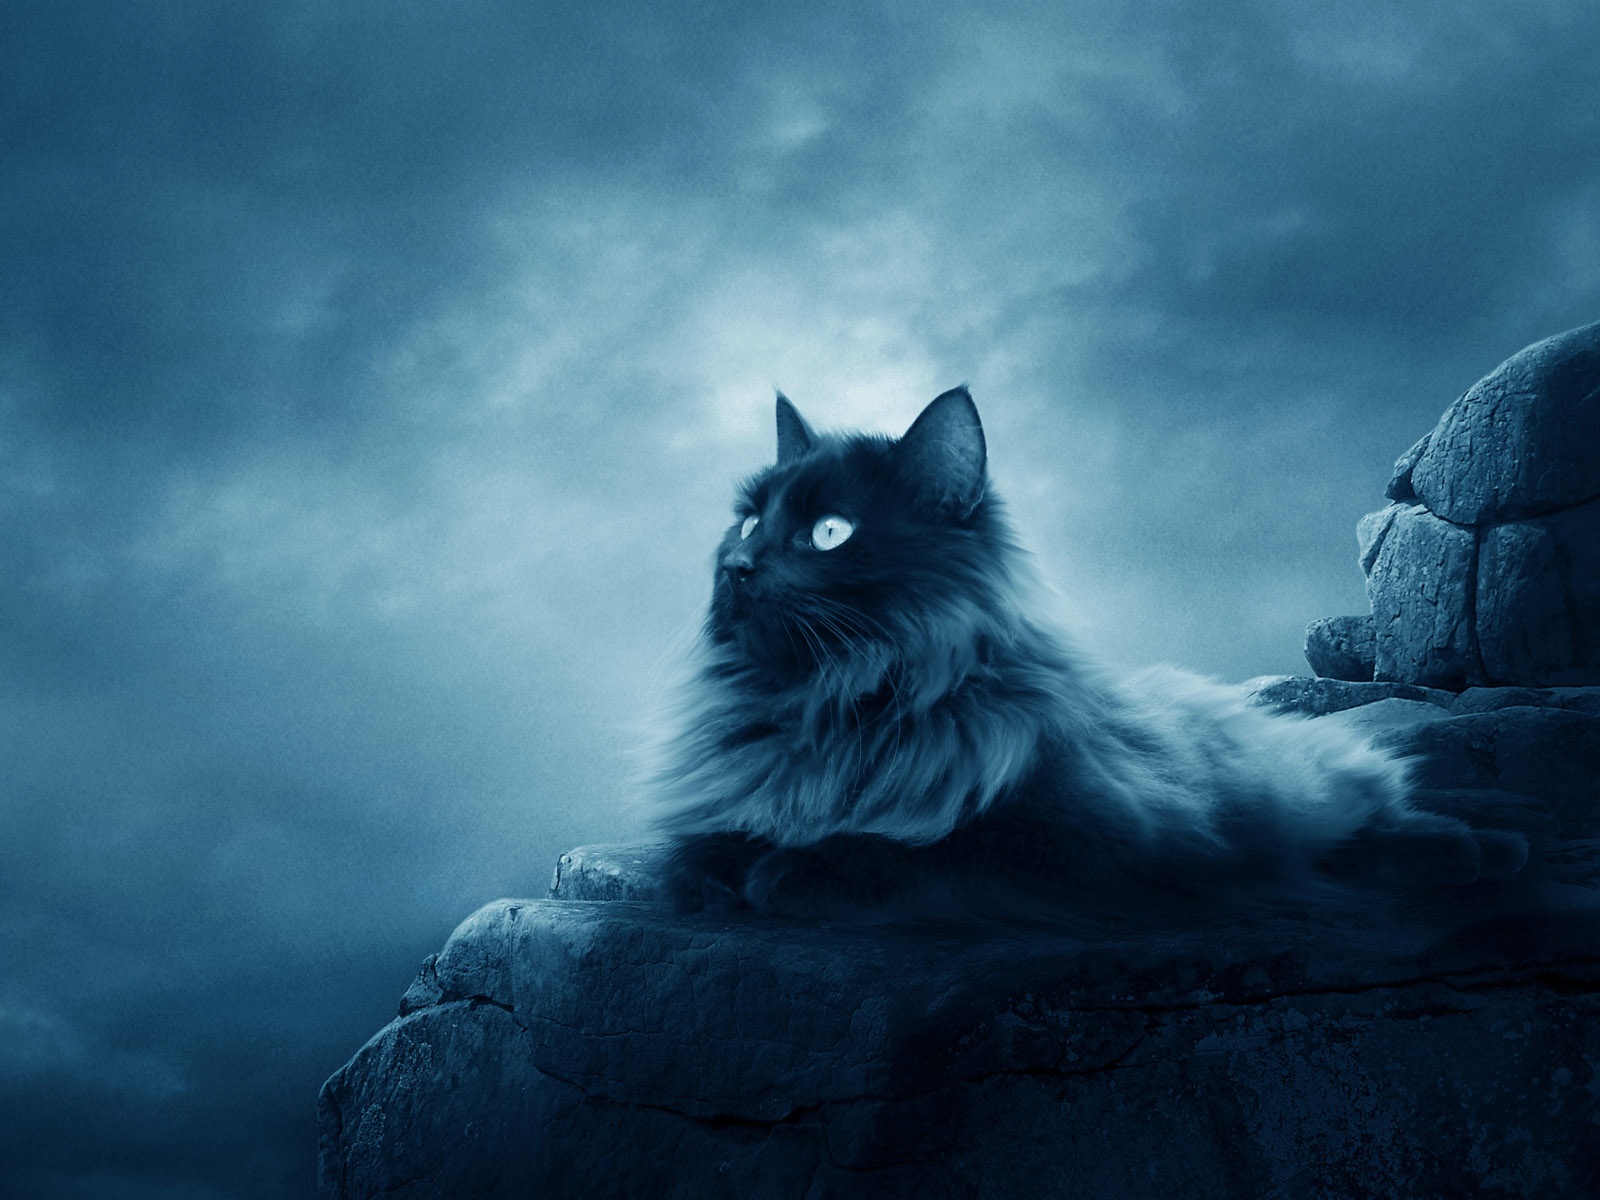 Free download Full Moon Cat Wallpaper in jpg format for download [1600x1200] for your Desktop, Mobile & Tablet. Explore Cats On The Moon Wallpaper. Cats On The Moon Wallpaper